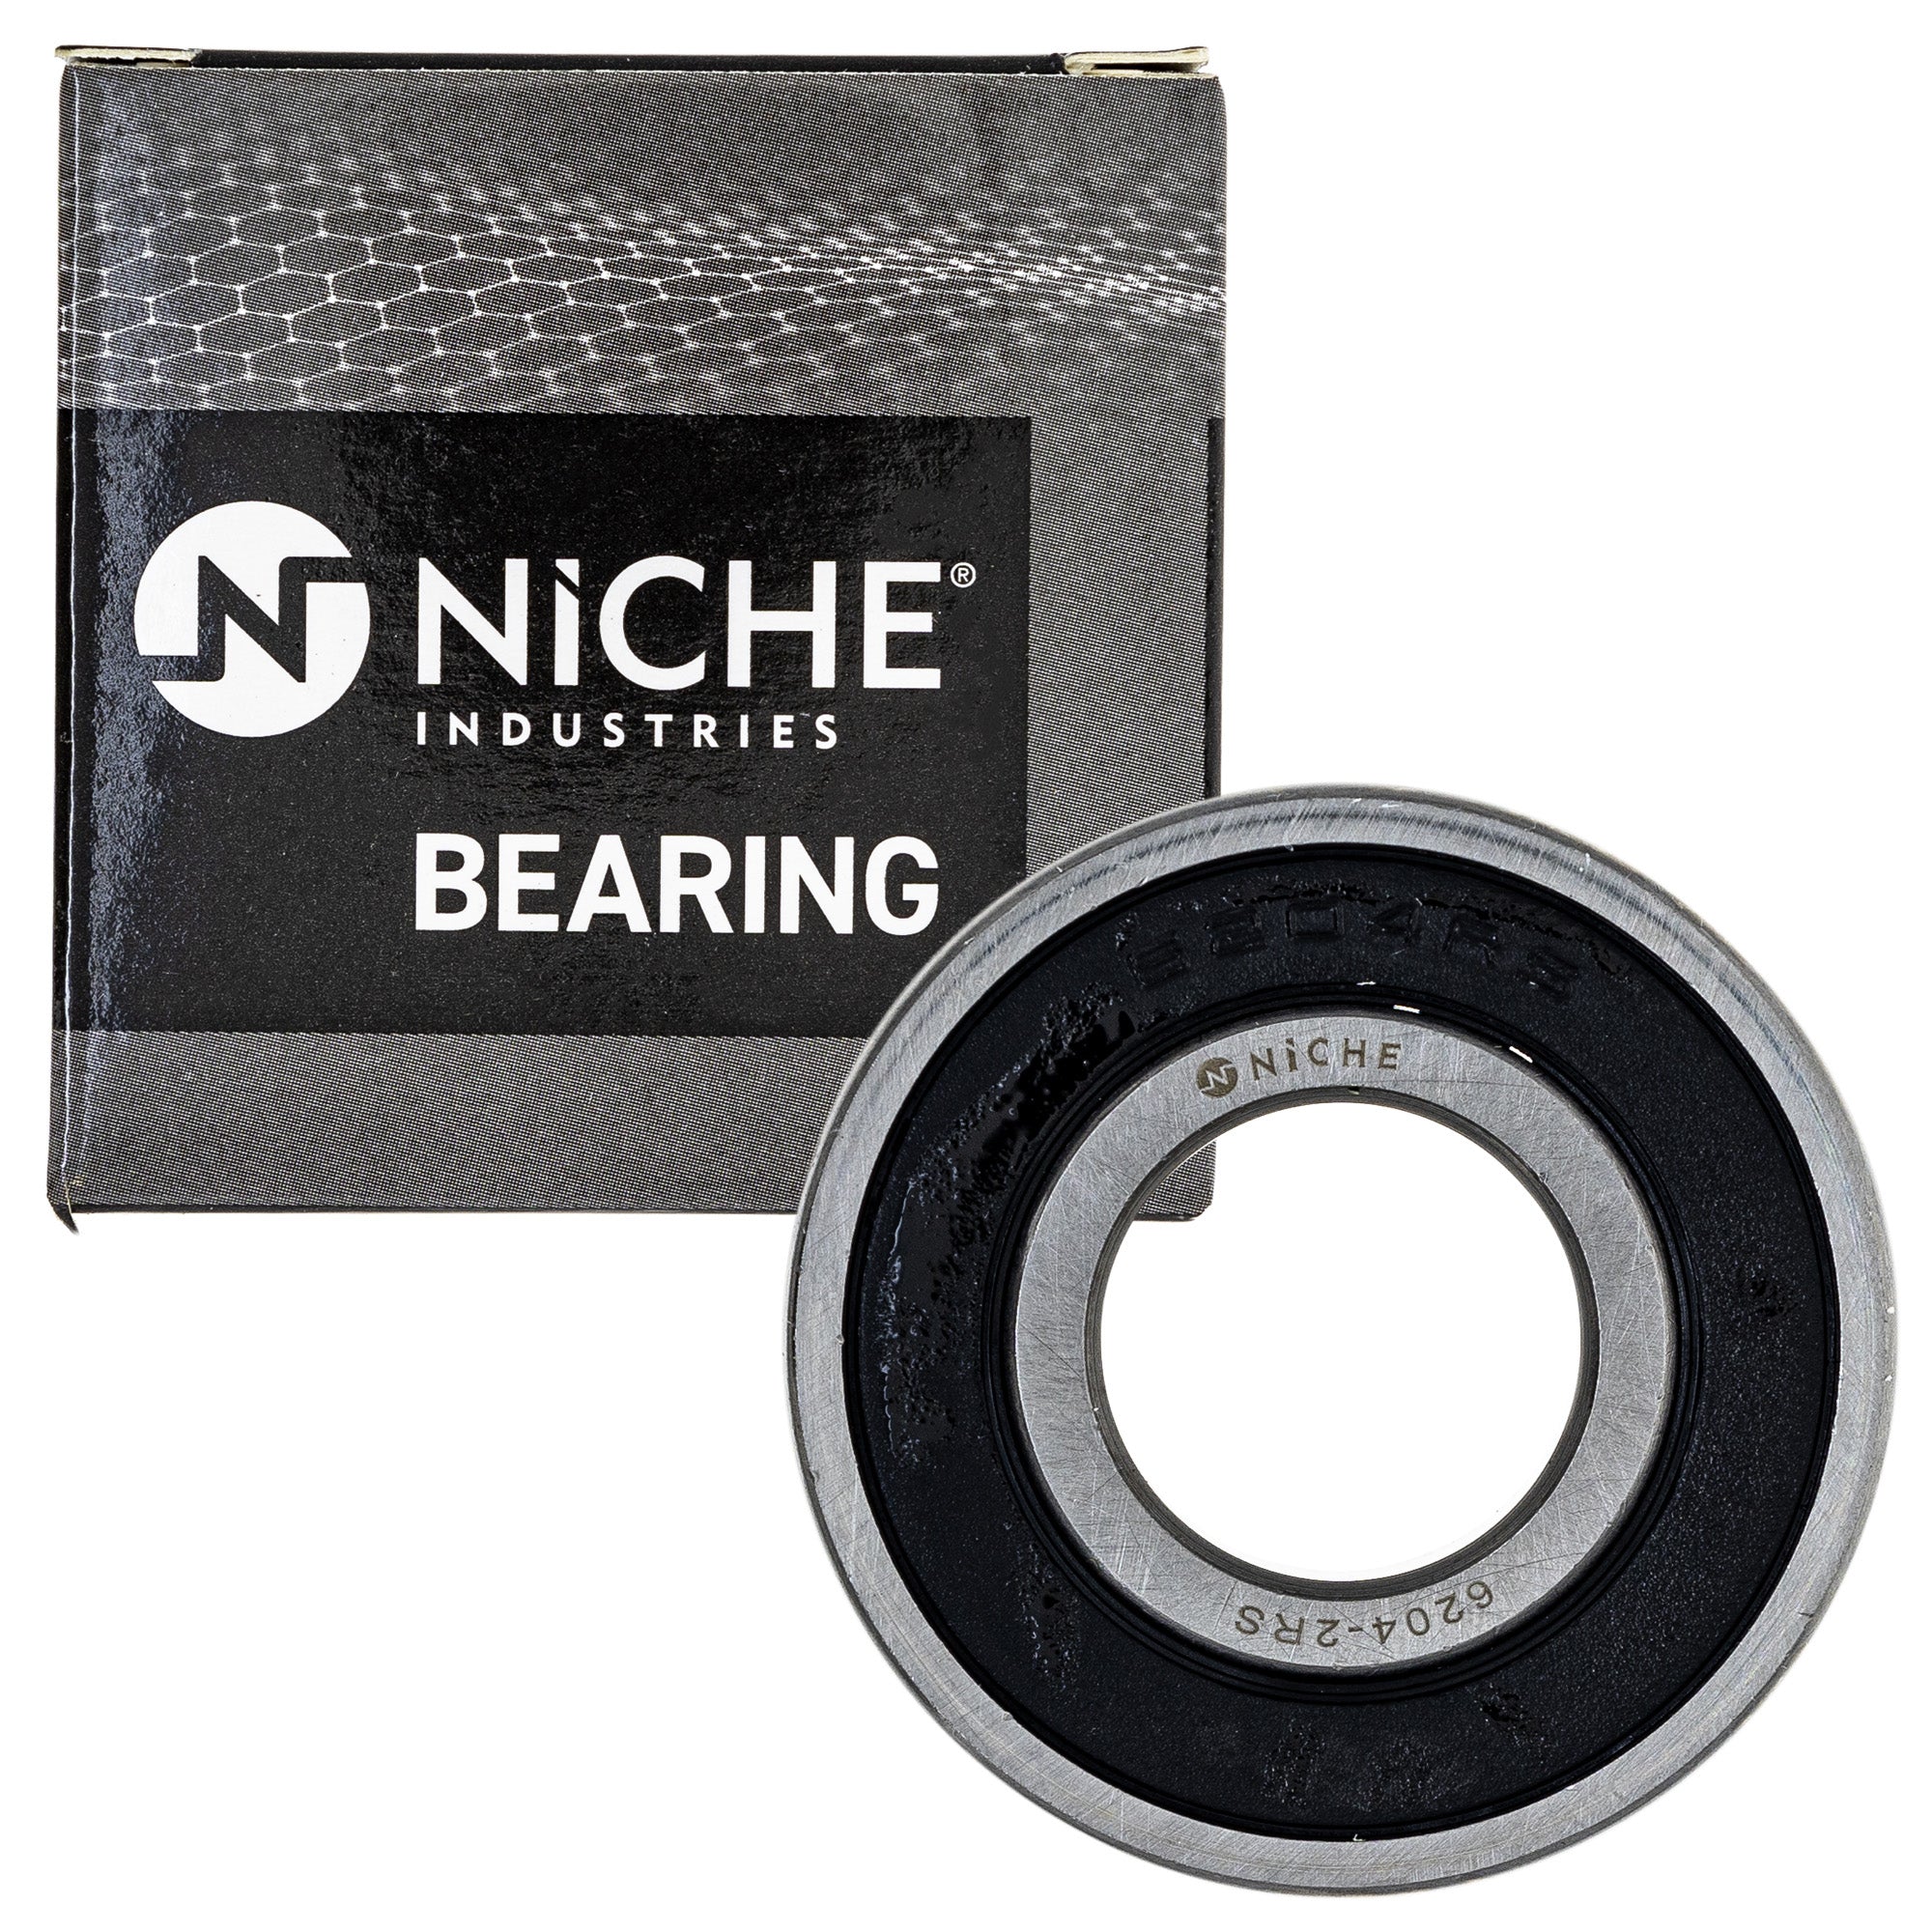 NICHE MK1009179 Wheel Bearing Seal Kit for zOTHER Ref No ST1100